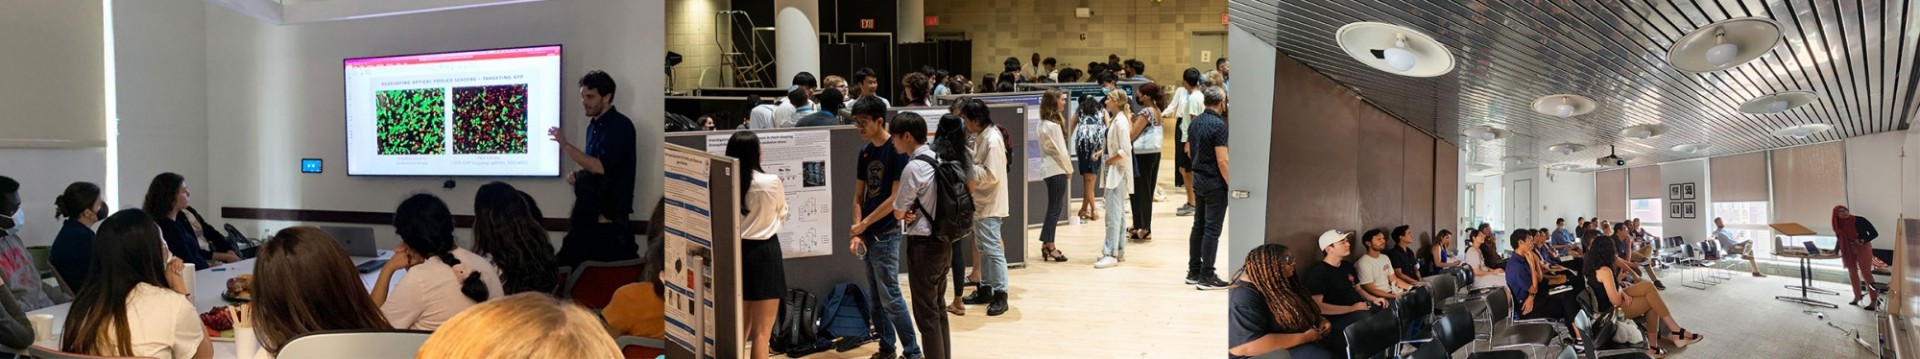 From left to right: a faculty teaching a lecture to a group of students, a large group of people at a poster symposium, people listening to someone presenting